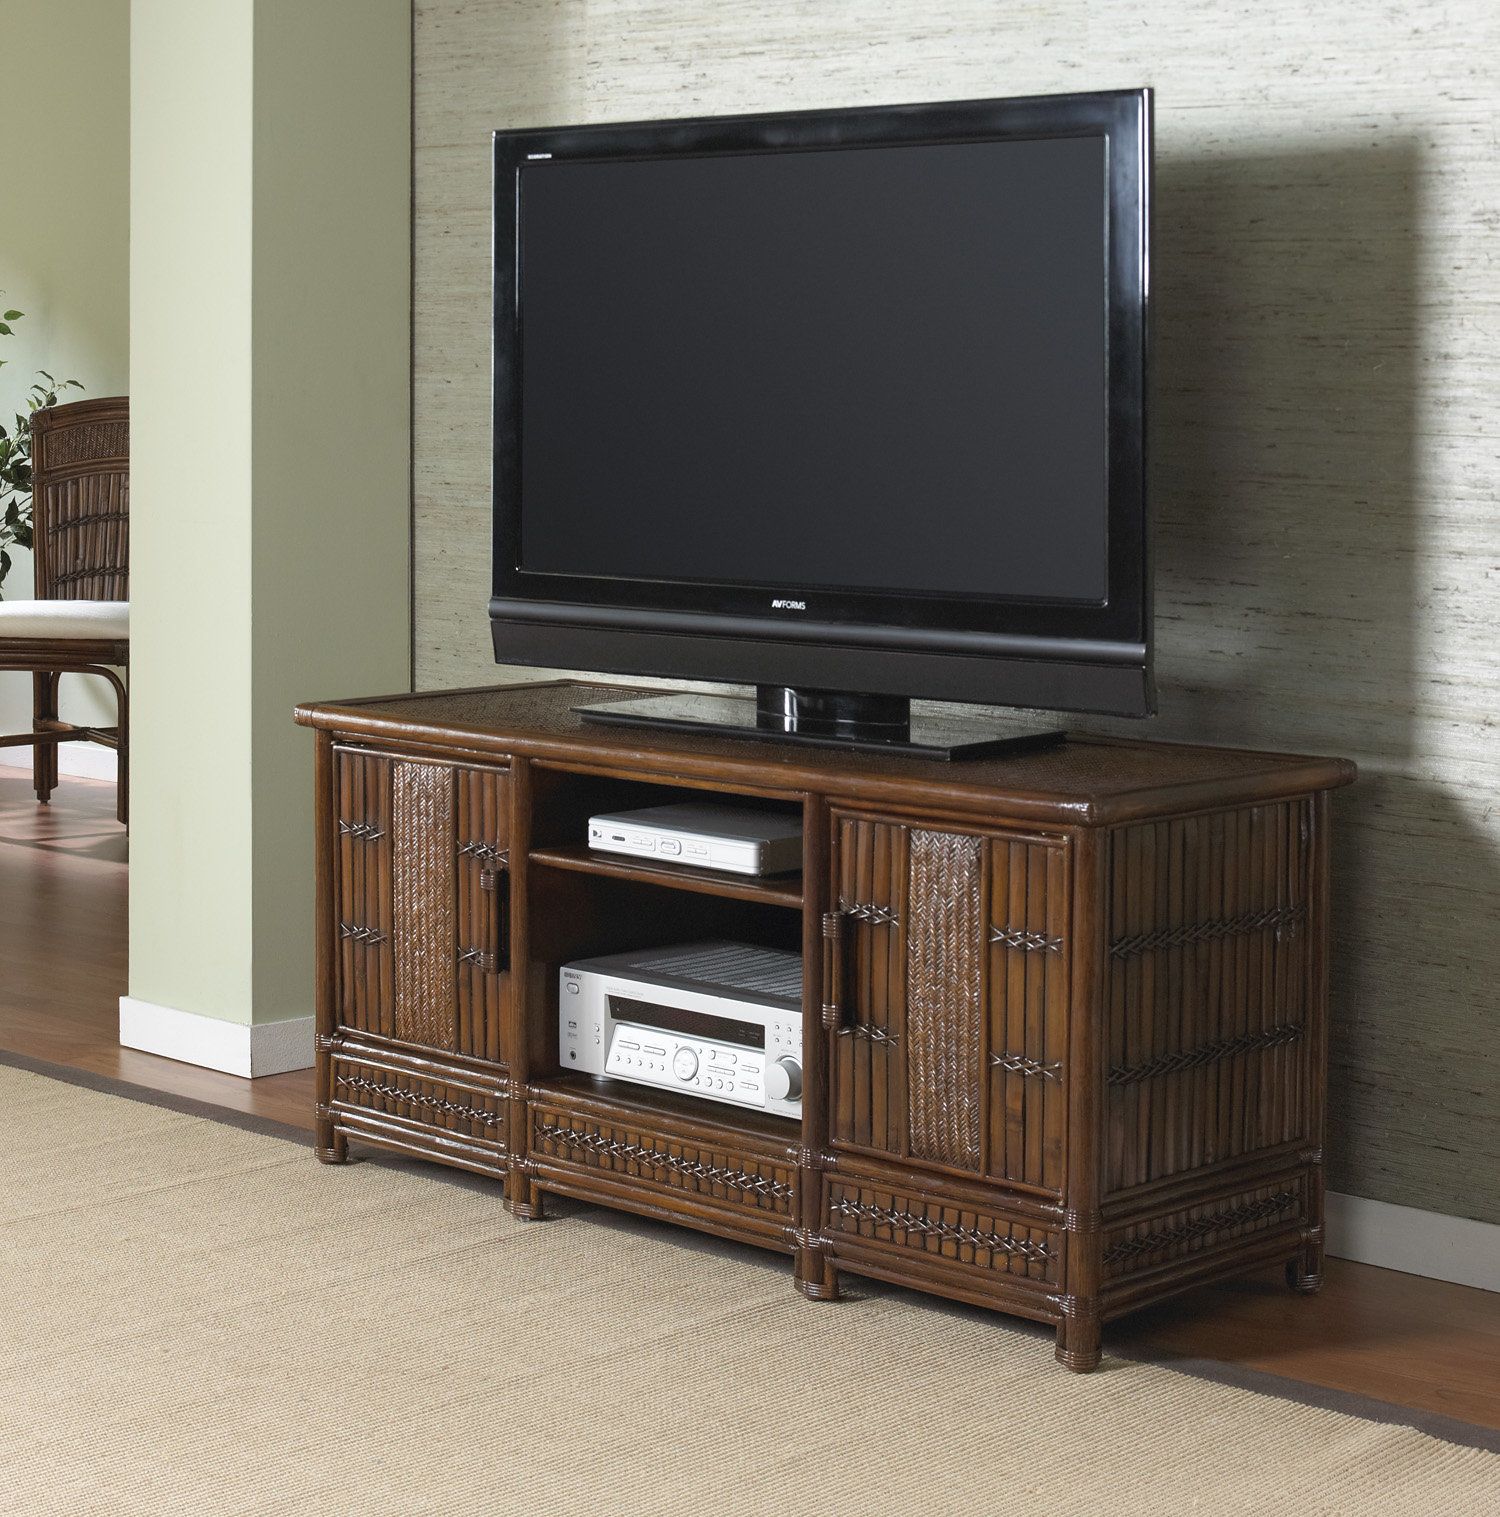 Beachcrest Home Hutchinson Island South 51" Tv Stand & Reviews | Wayfair Inside Marvin Rustic Natural 60 Inch Tv Stands (View 6 of 30)